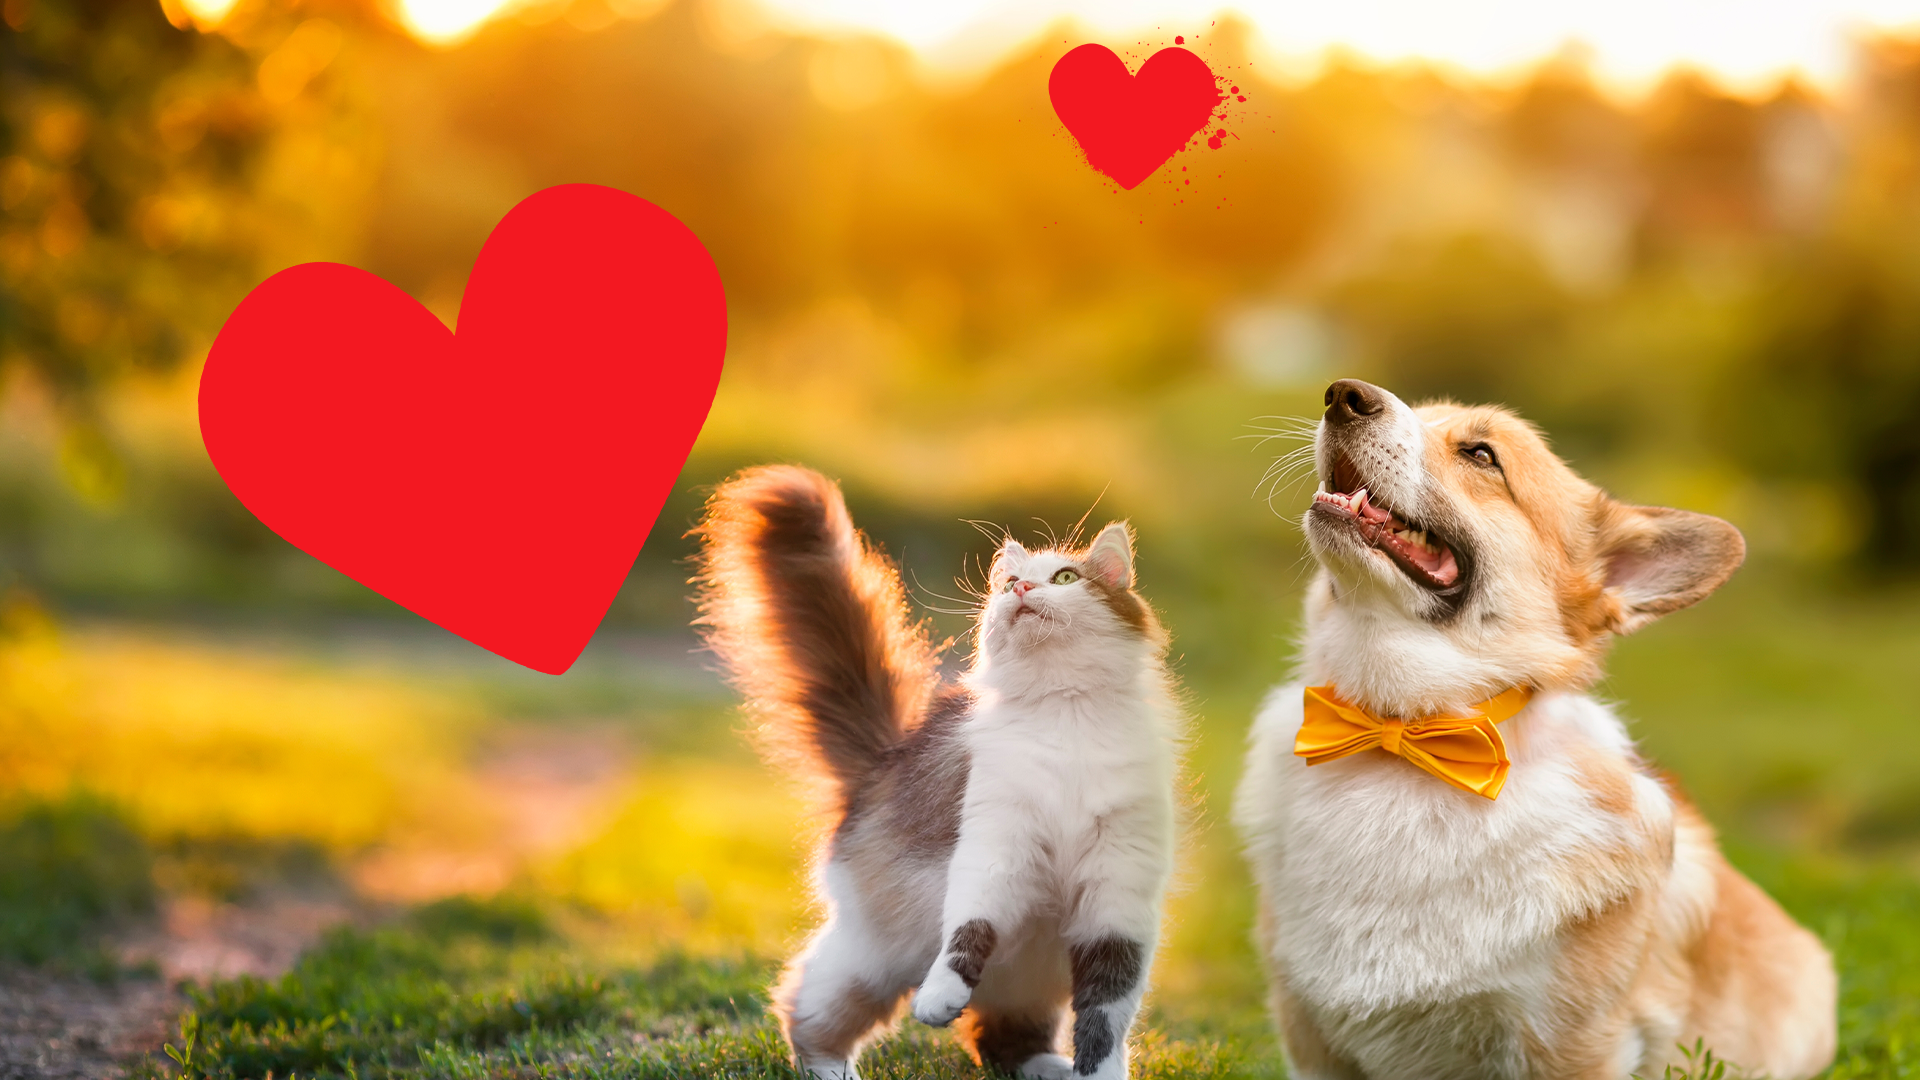 Dog and cat being cute with hearts